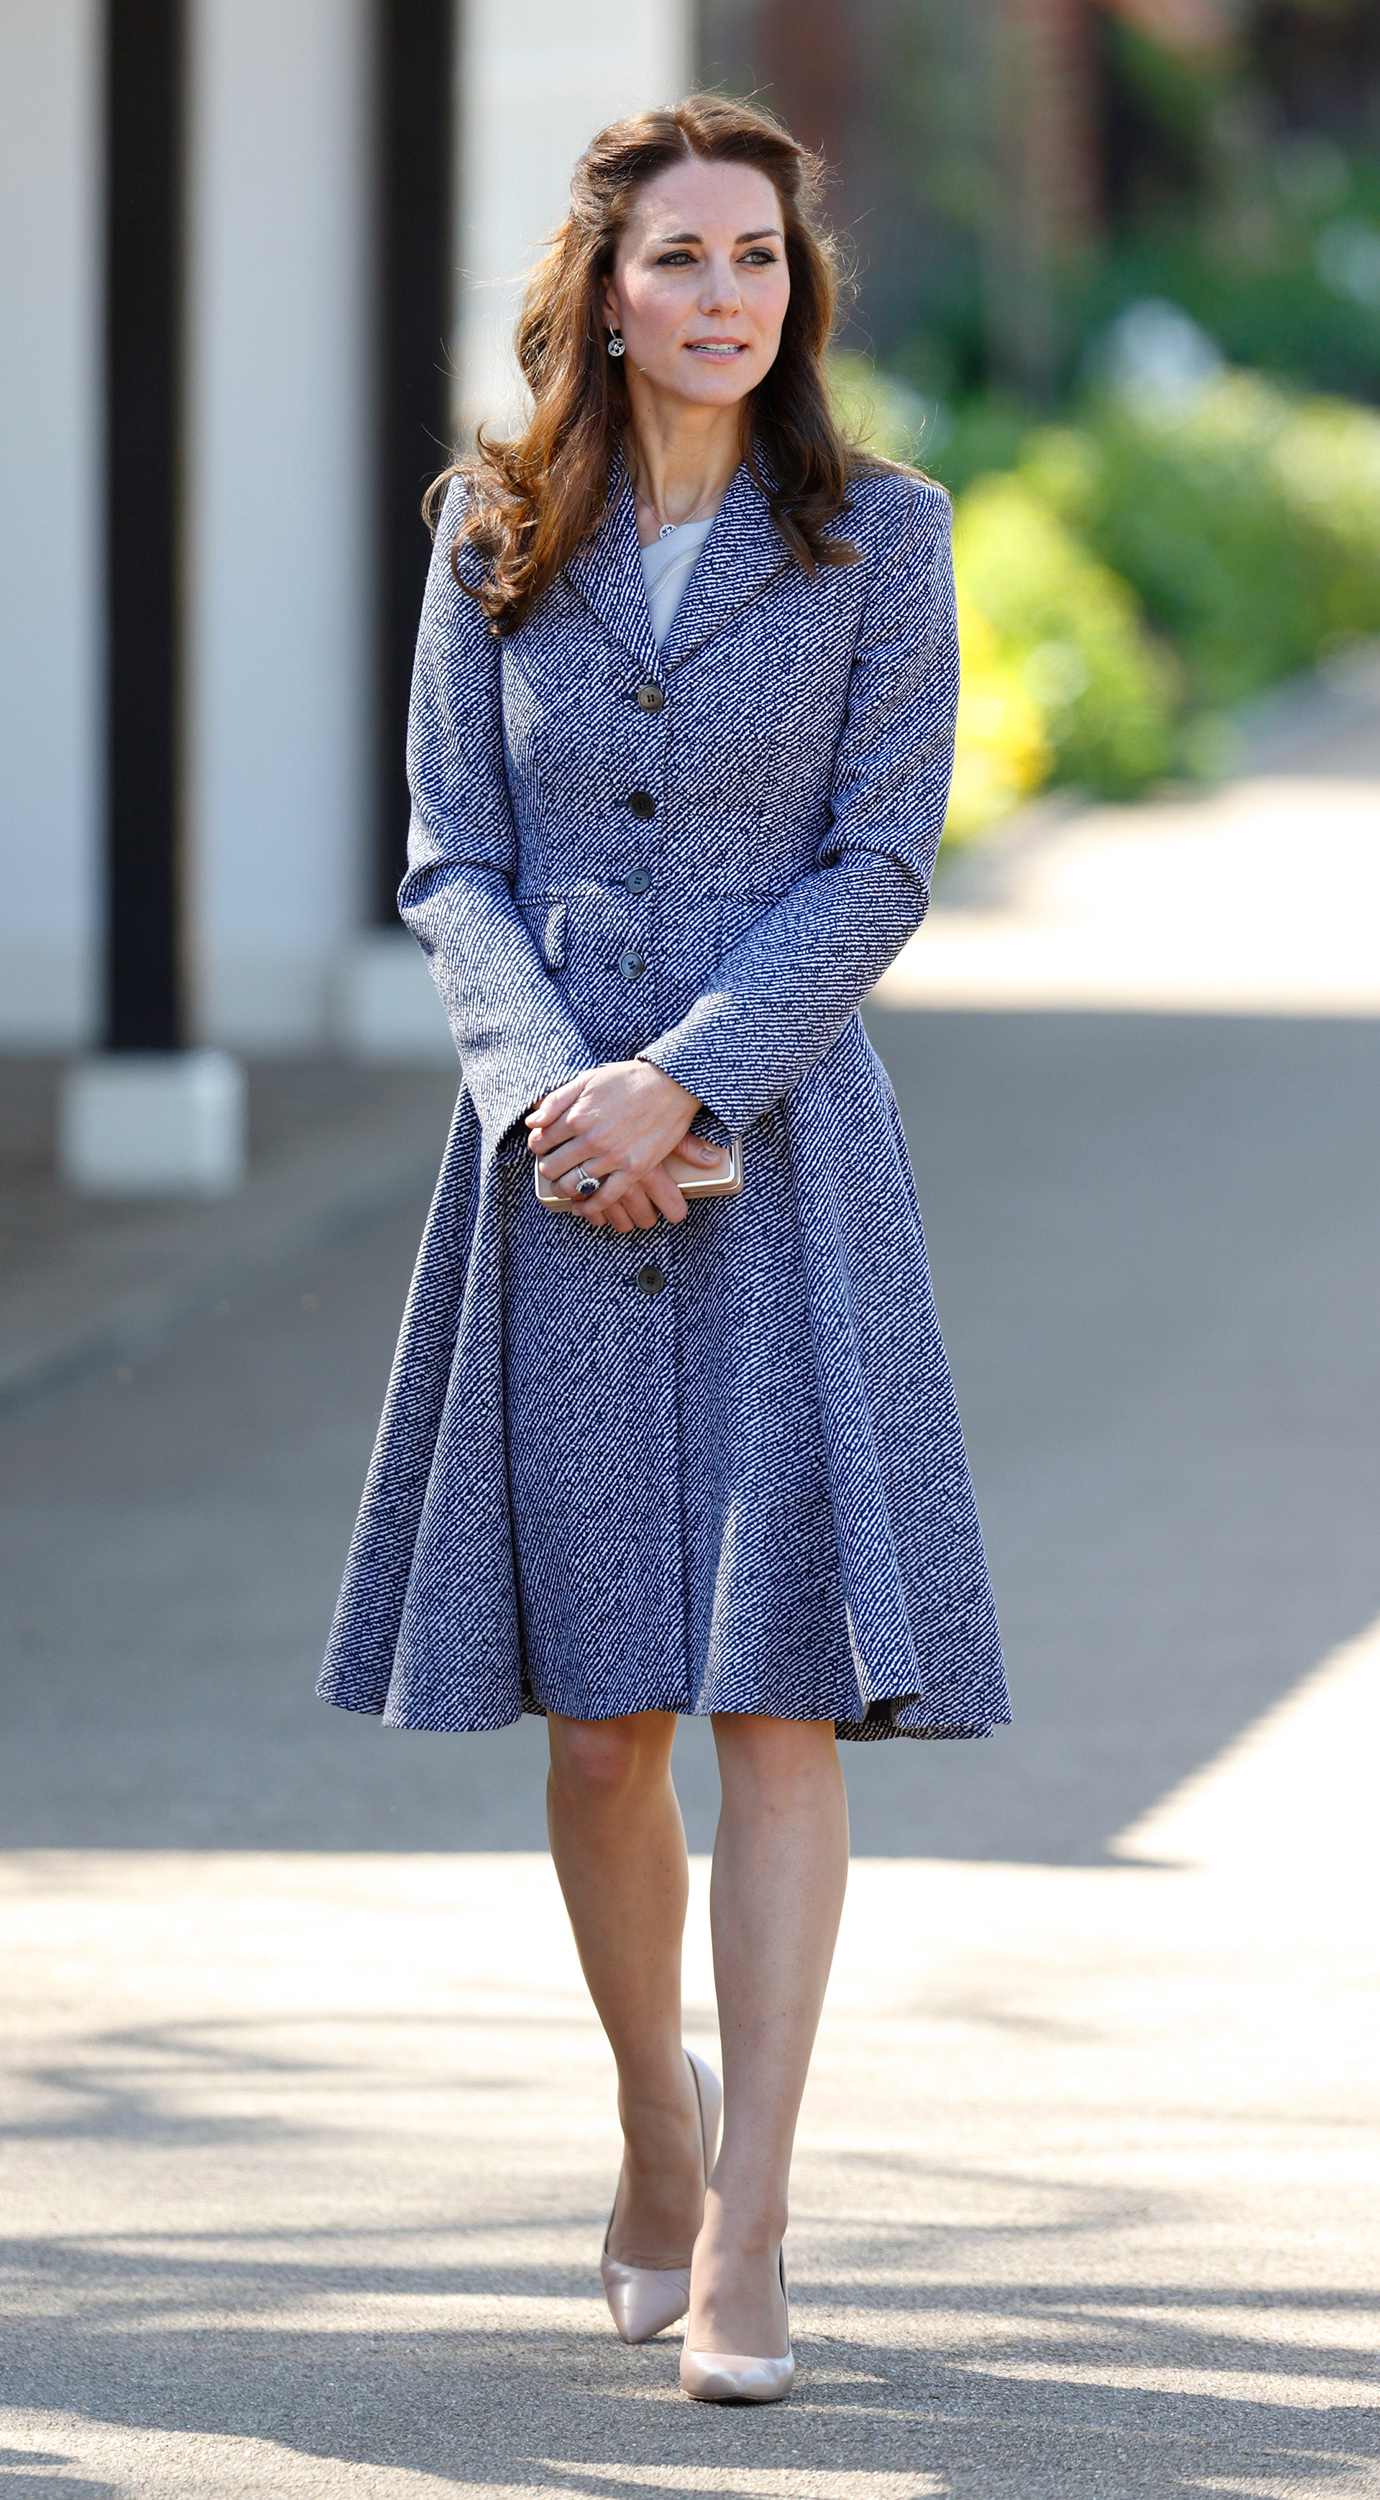 Catherine, Duchess of Cambridge arrives to open the Magic Garden at Hampton Court Palace in London on May 4, 2016.